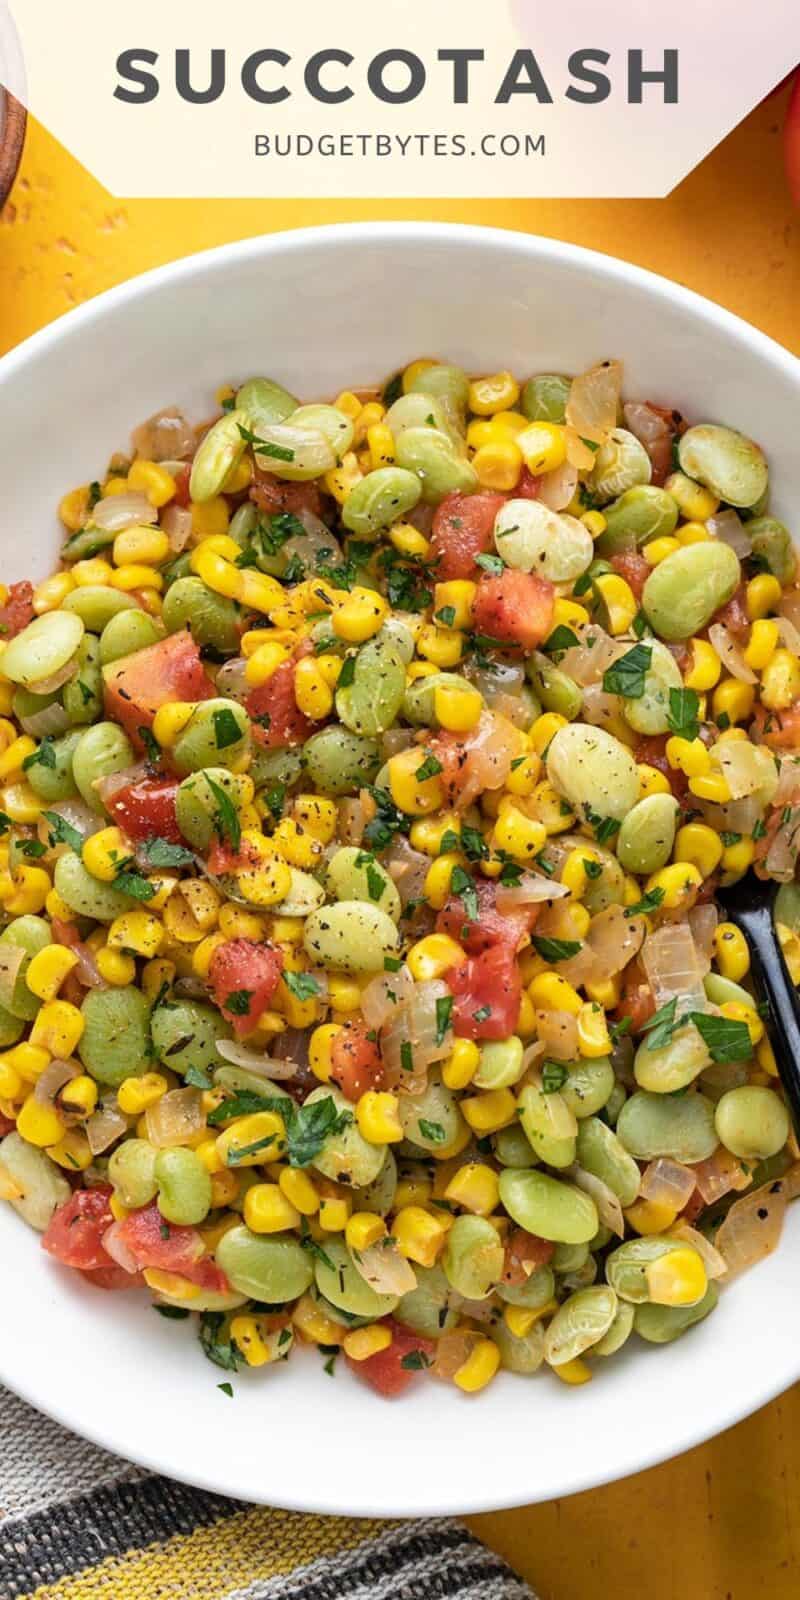 Overhead view of a bowl full of succotash.